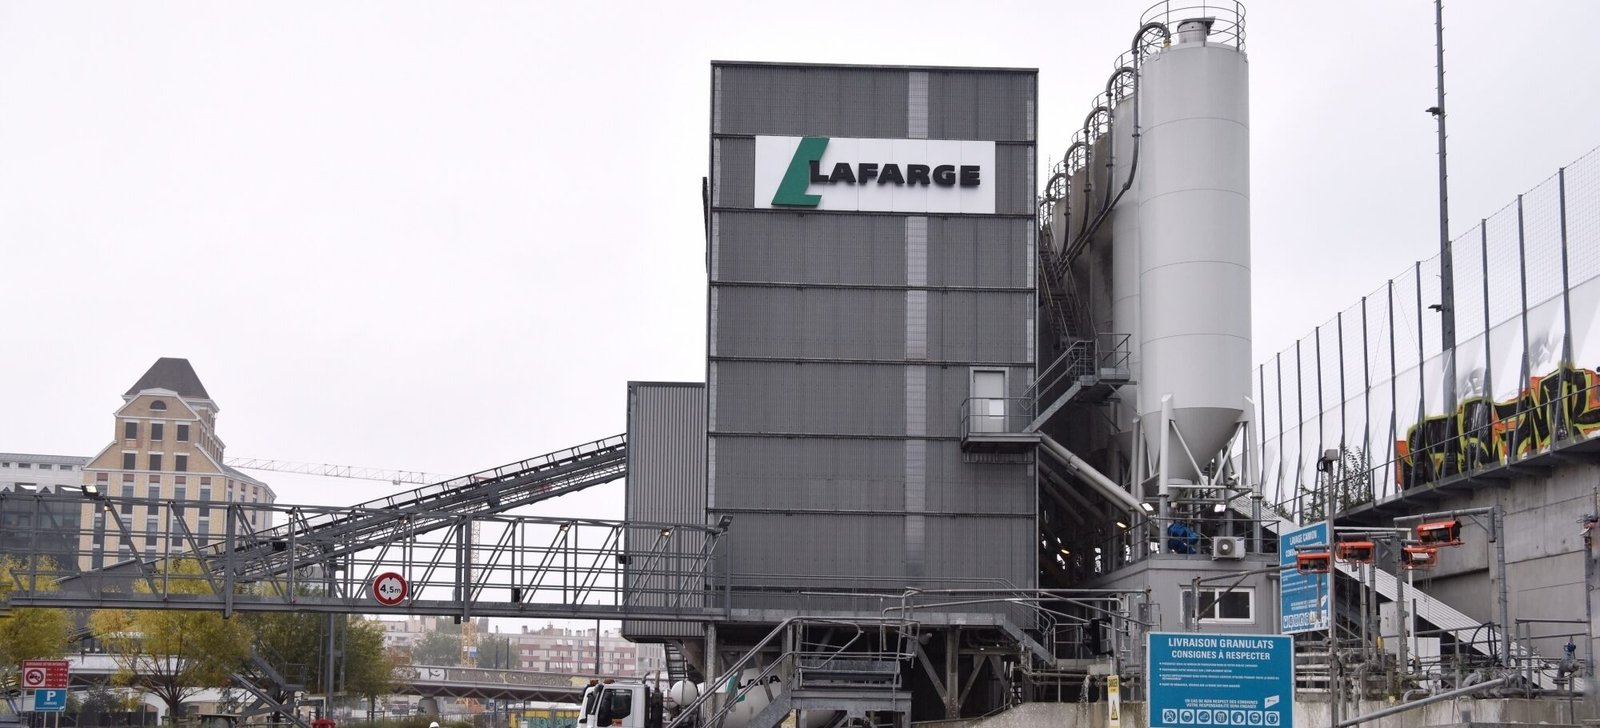 French cement maker Lafarge